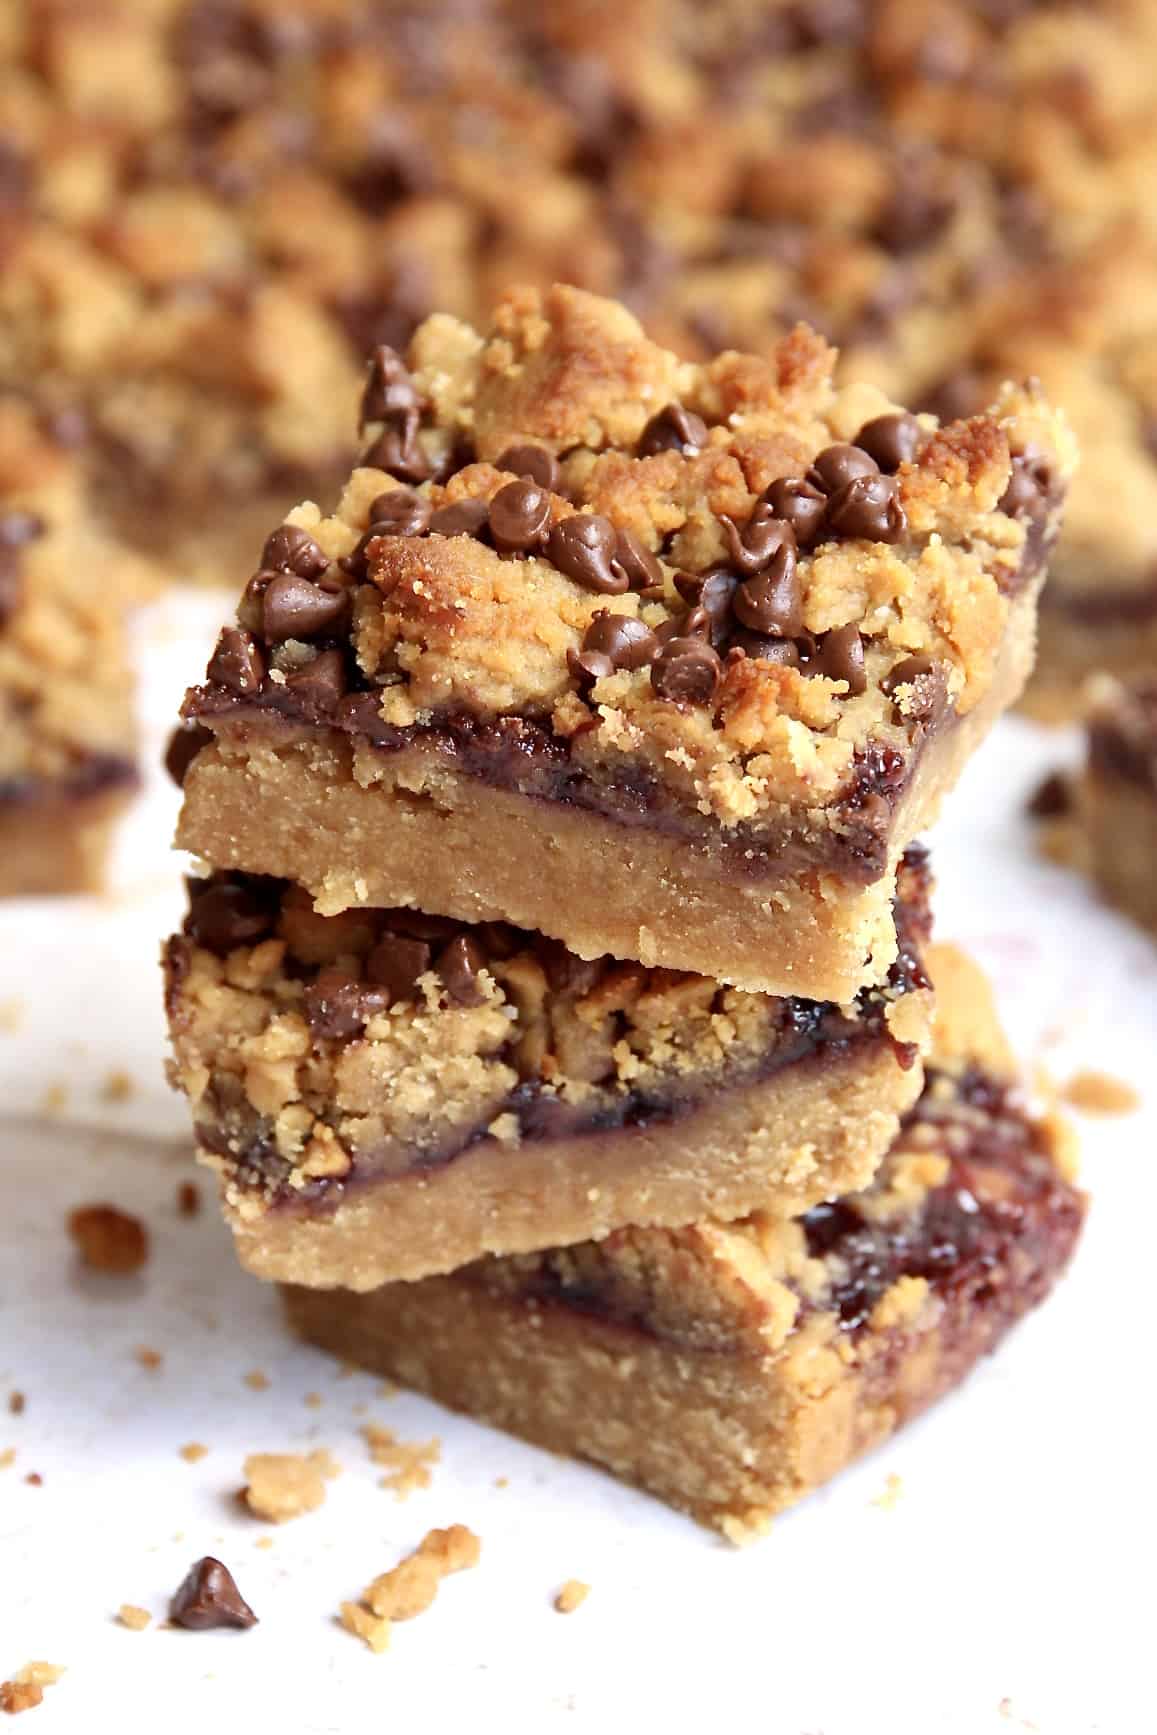 Peanut Butter and Jelly Bars with honey & chocolate chips